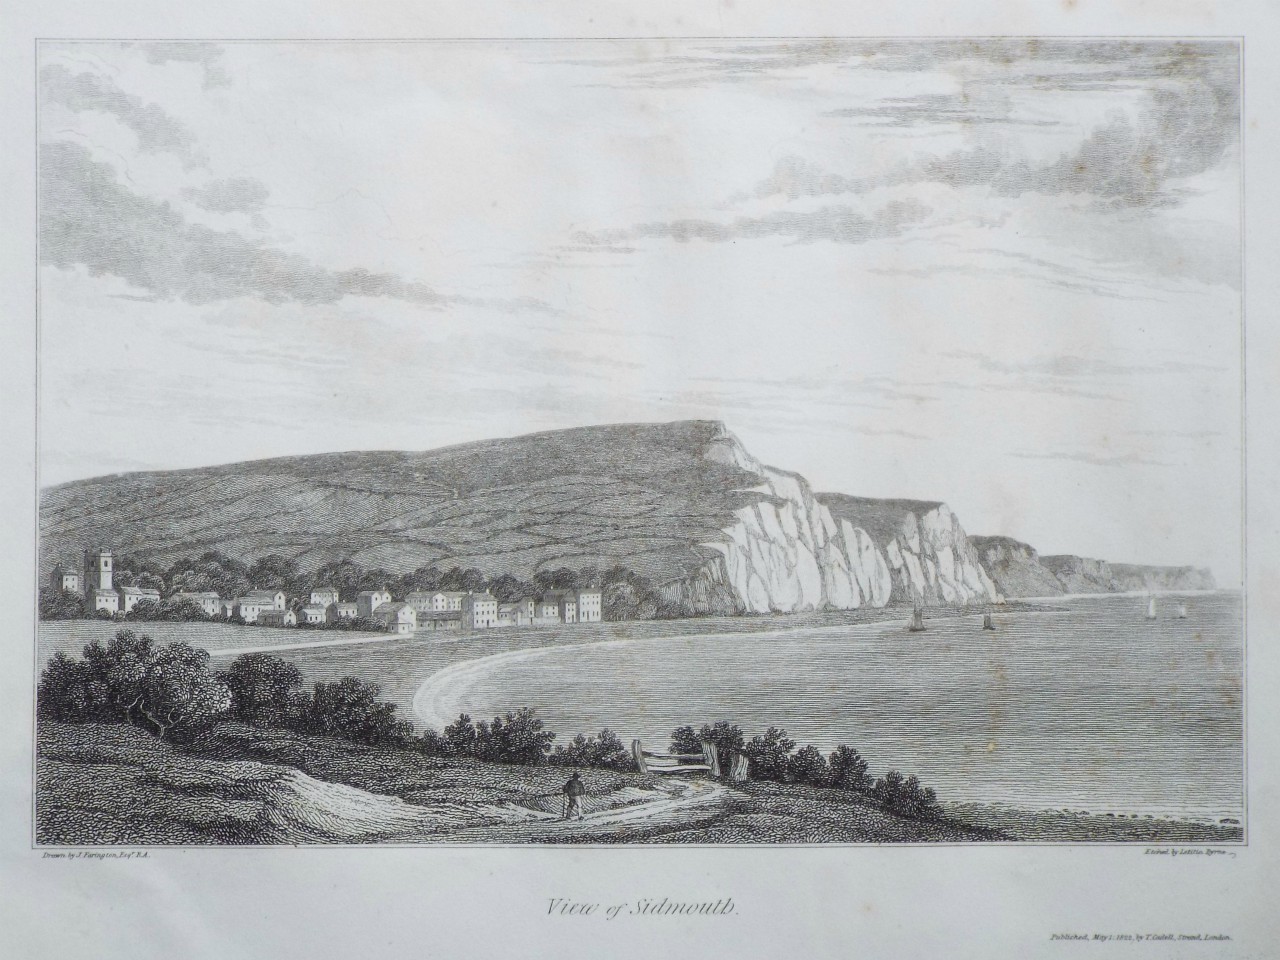 Print - View of Sidmouth. - Byrne